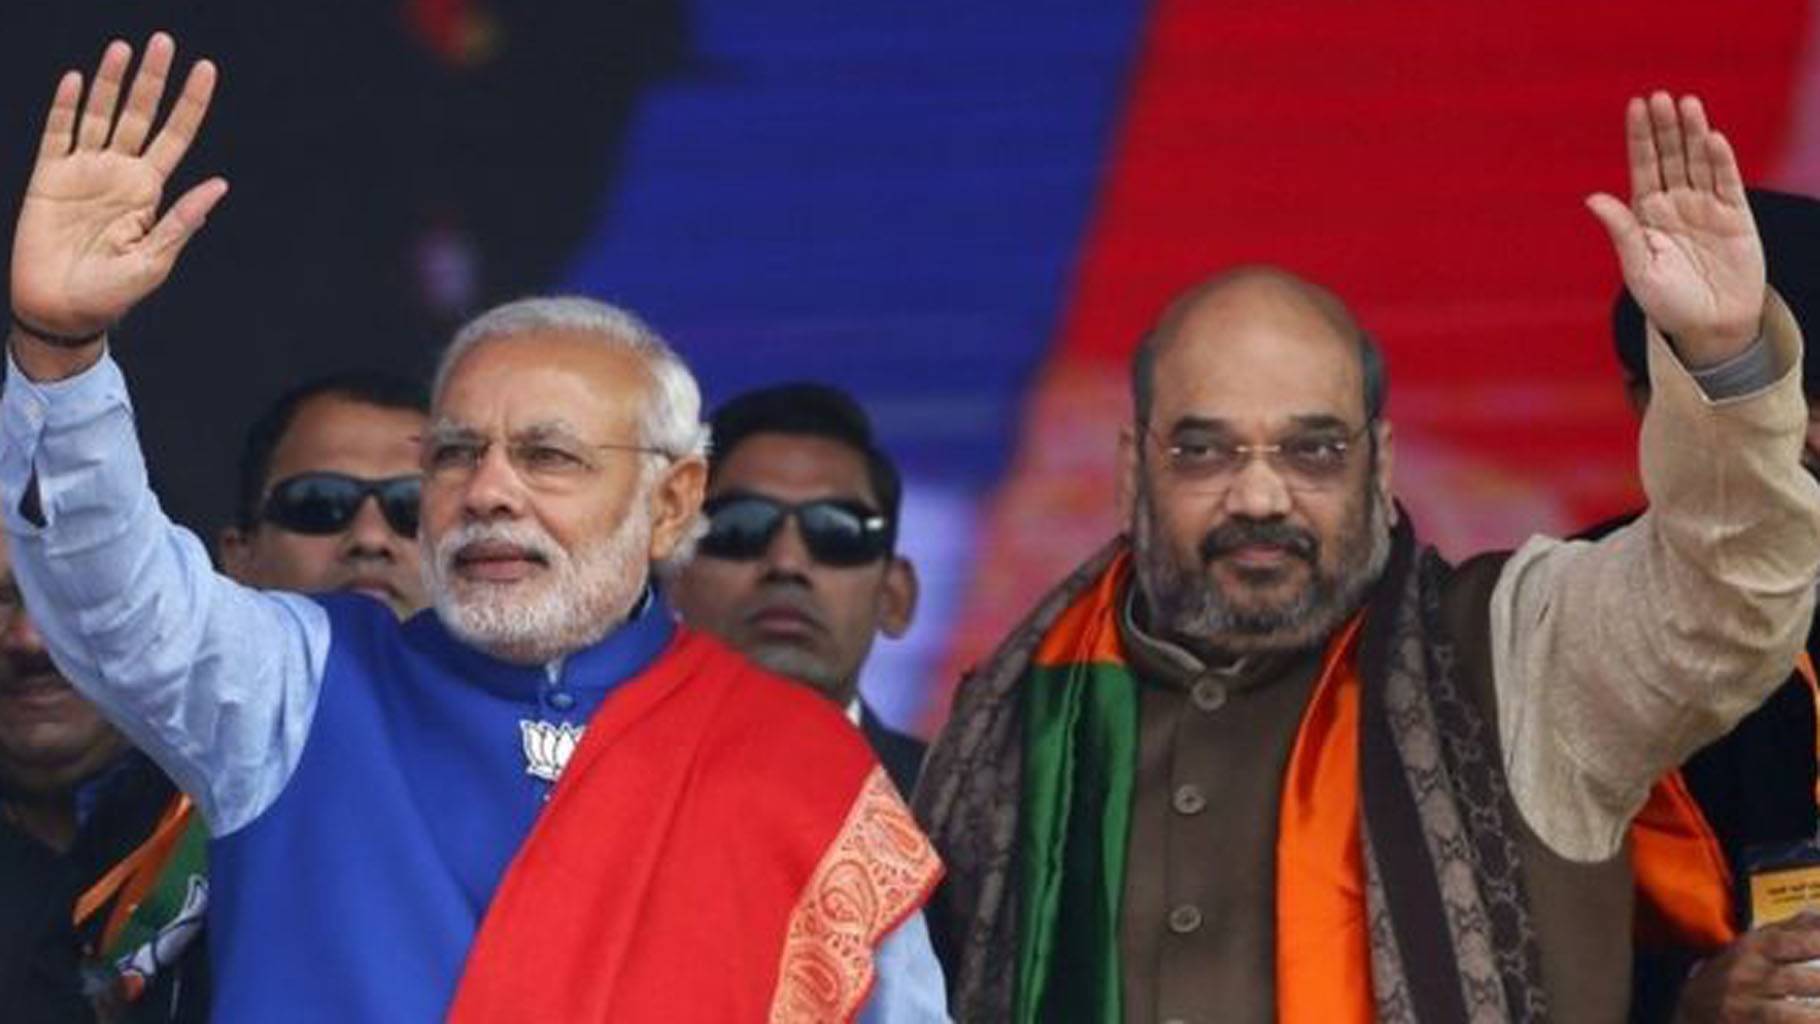 Cabinet reshuffle on the cards? PM Modi, Shah & Nadda in a huddle